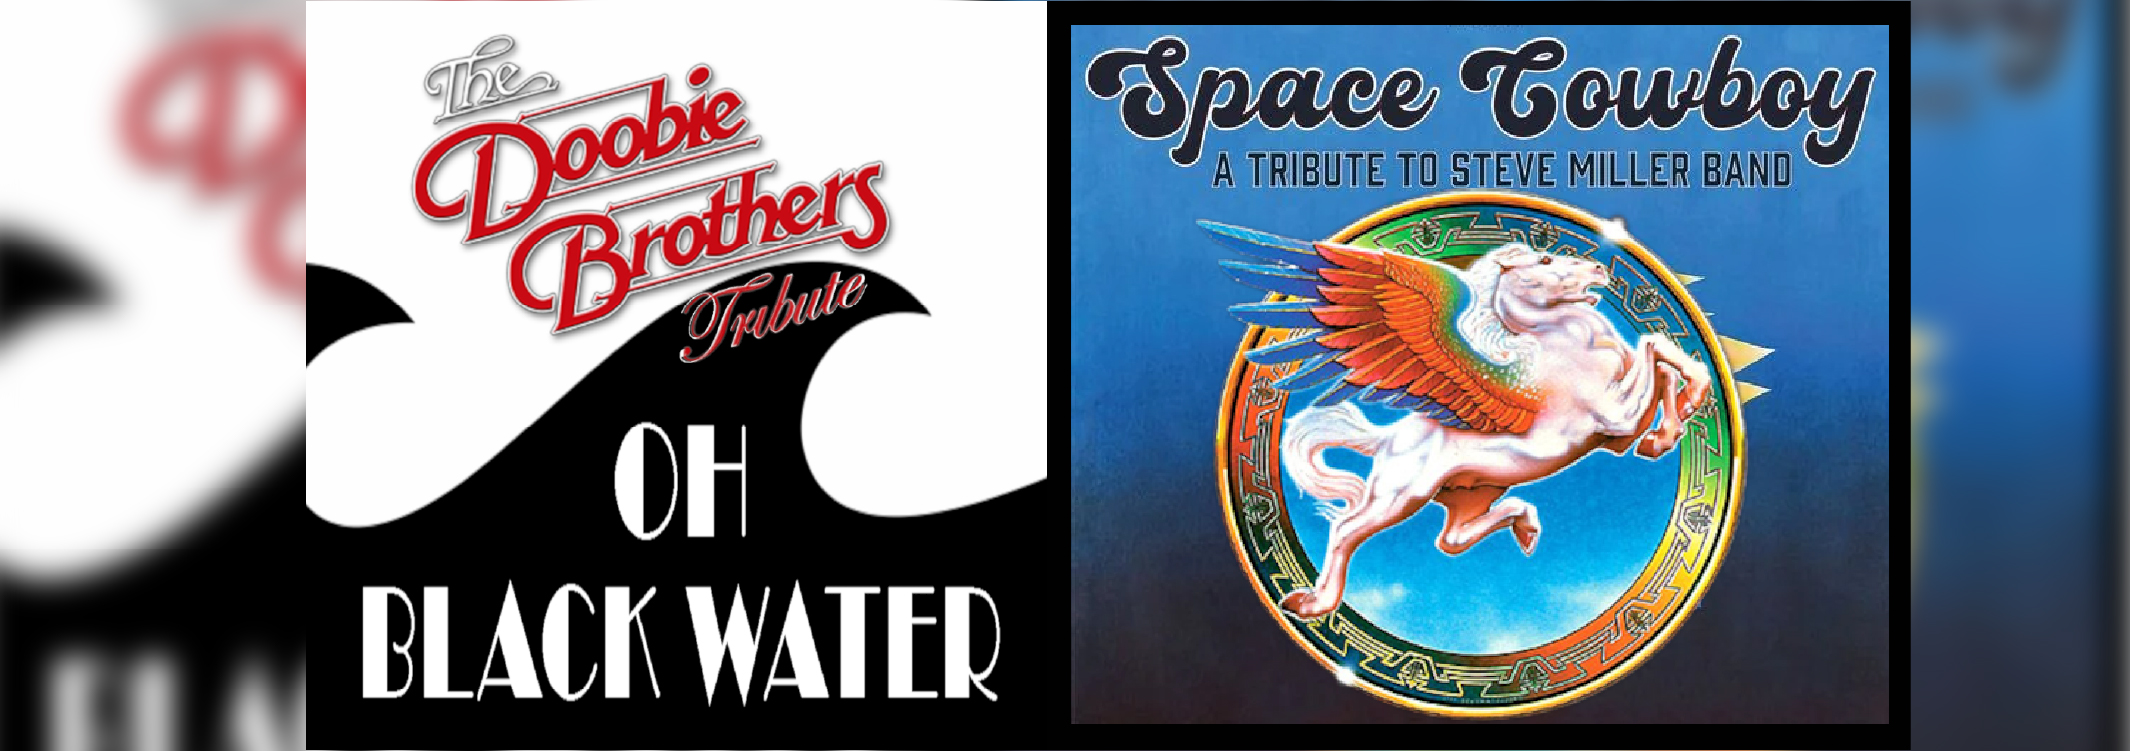 Space Cowboy/Oh Black Water – Tribute to the Steve Miller Band and Doobie Brothers